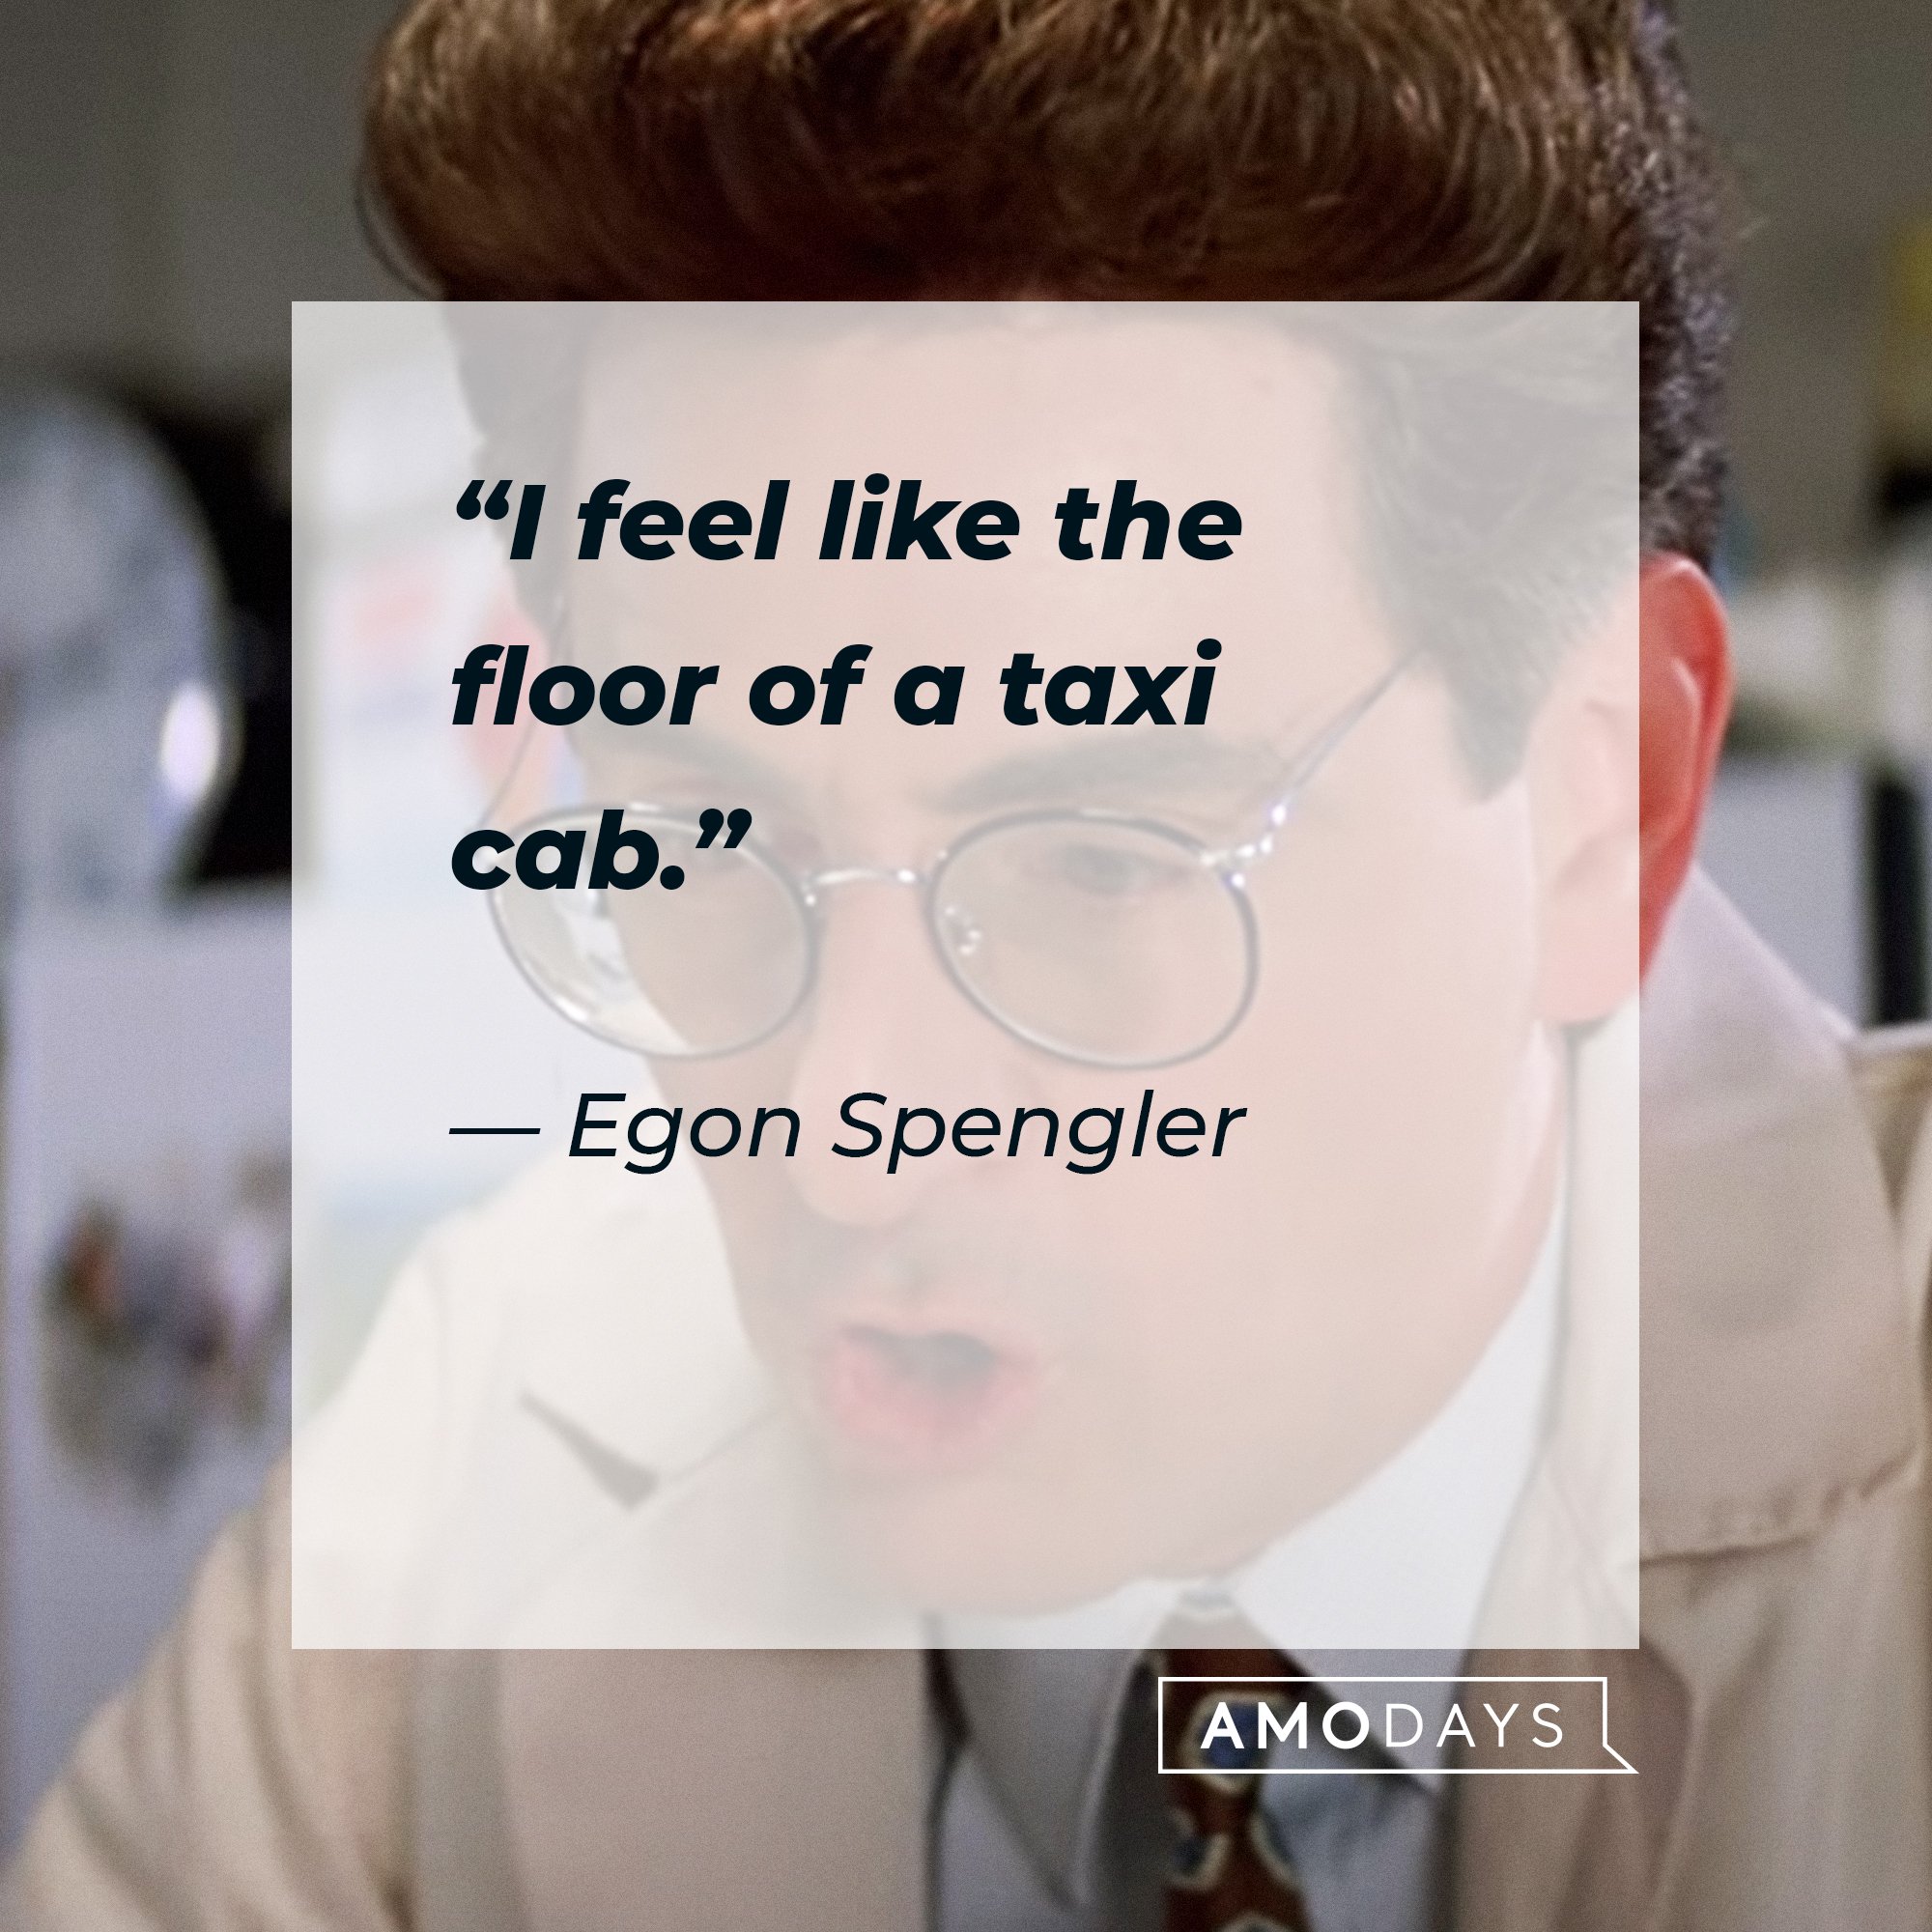  Egon Spengler's quote:  “I feel like the floor of a taxi cab.” | Image: AmoDays